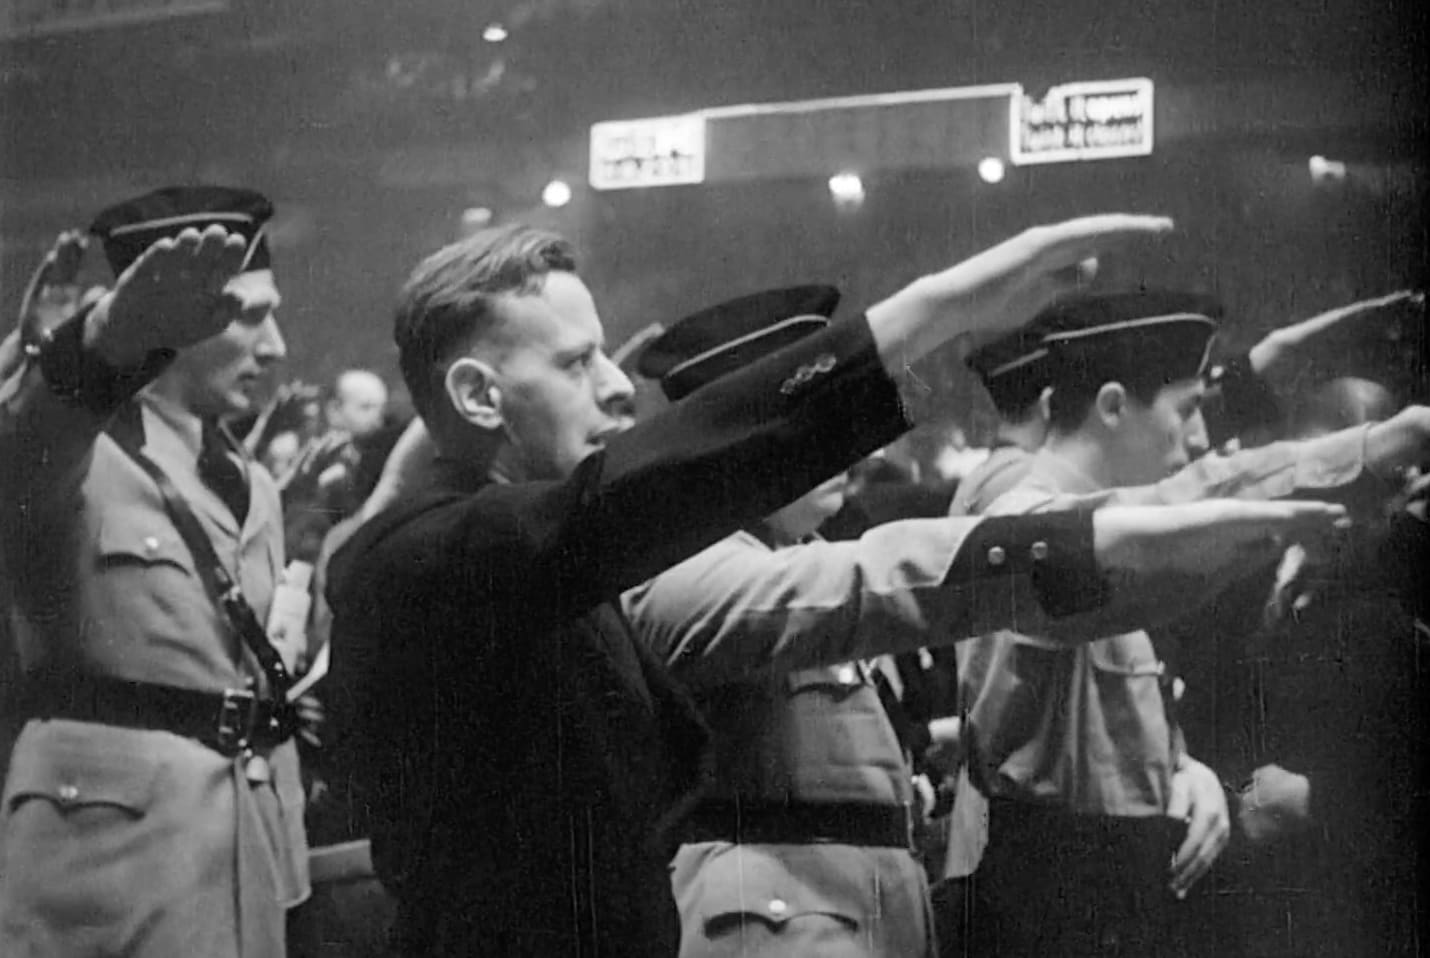 20,000 Americans Hold a Pro-Nazi Rally in Madison Square Garden in 1939: Chilling Video Re-Captures a Lost Chapter in US History